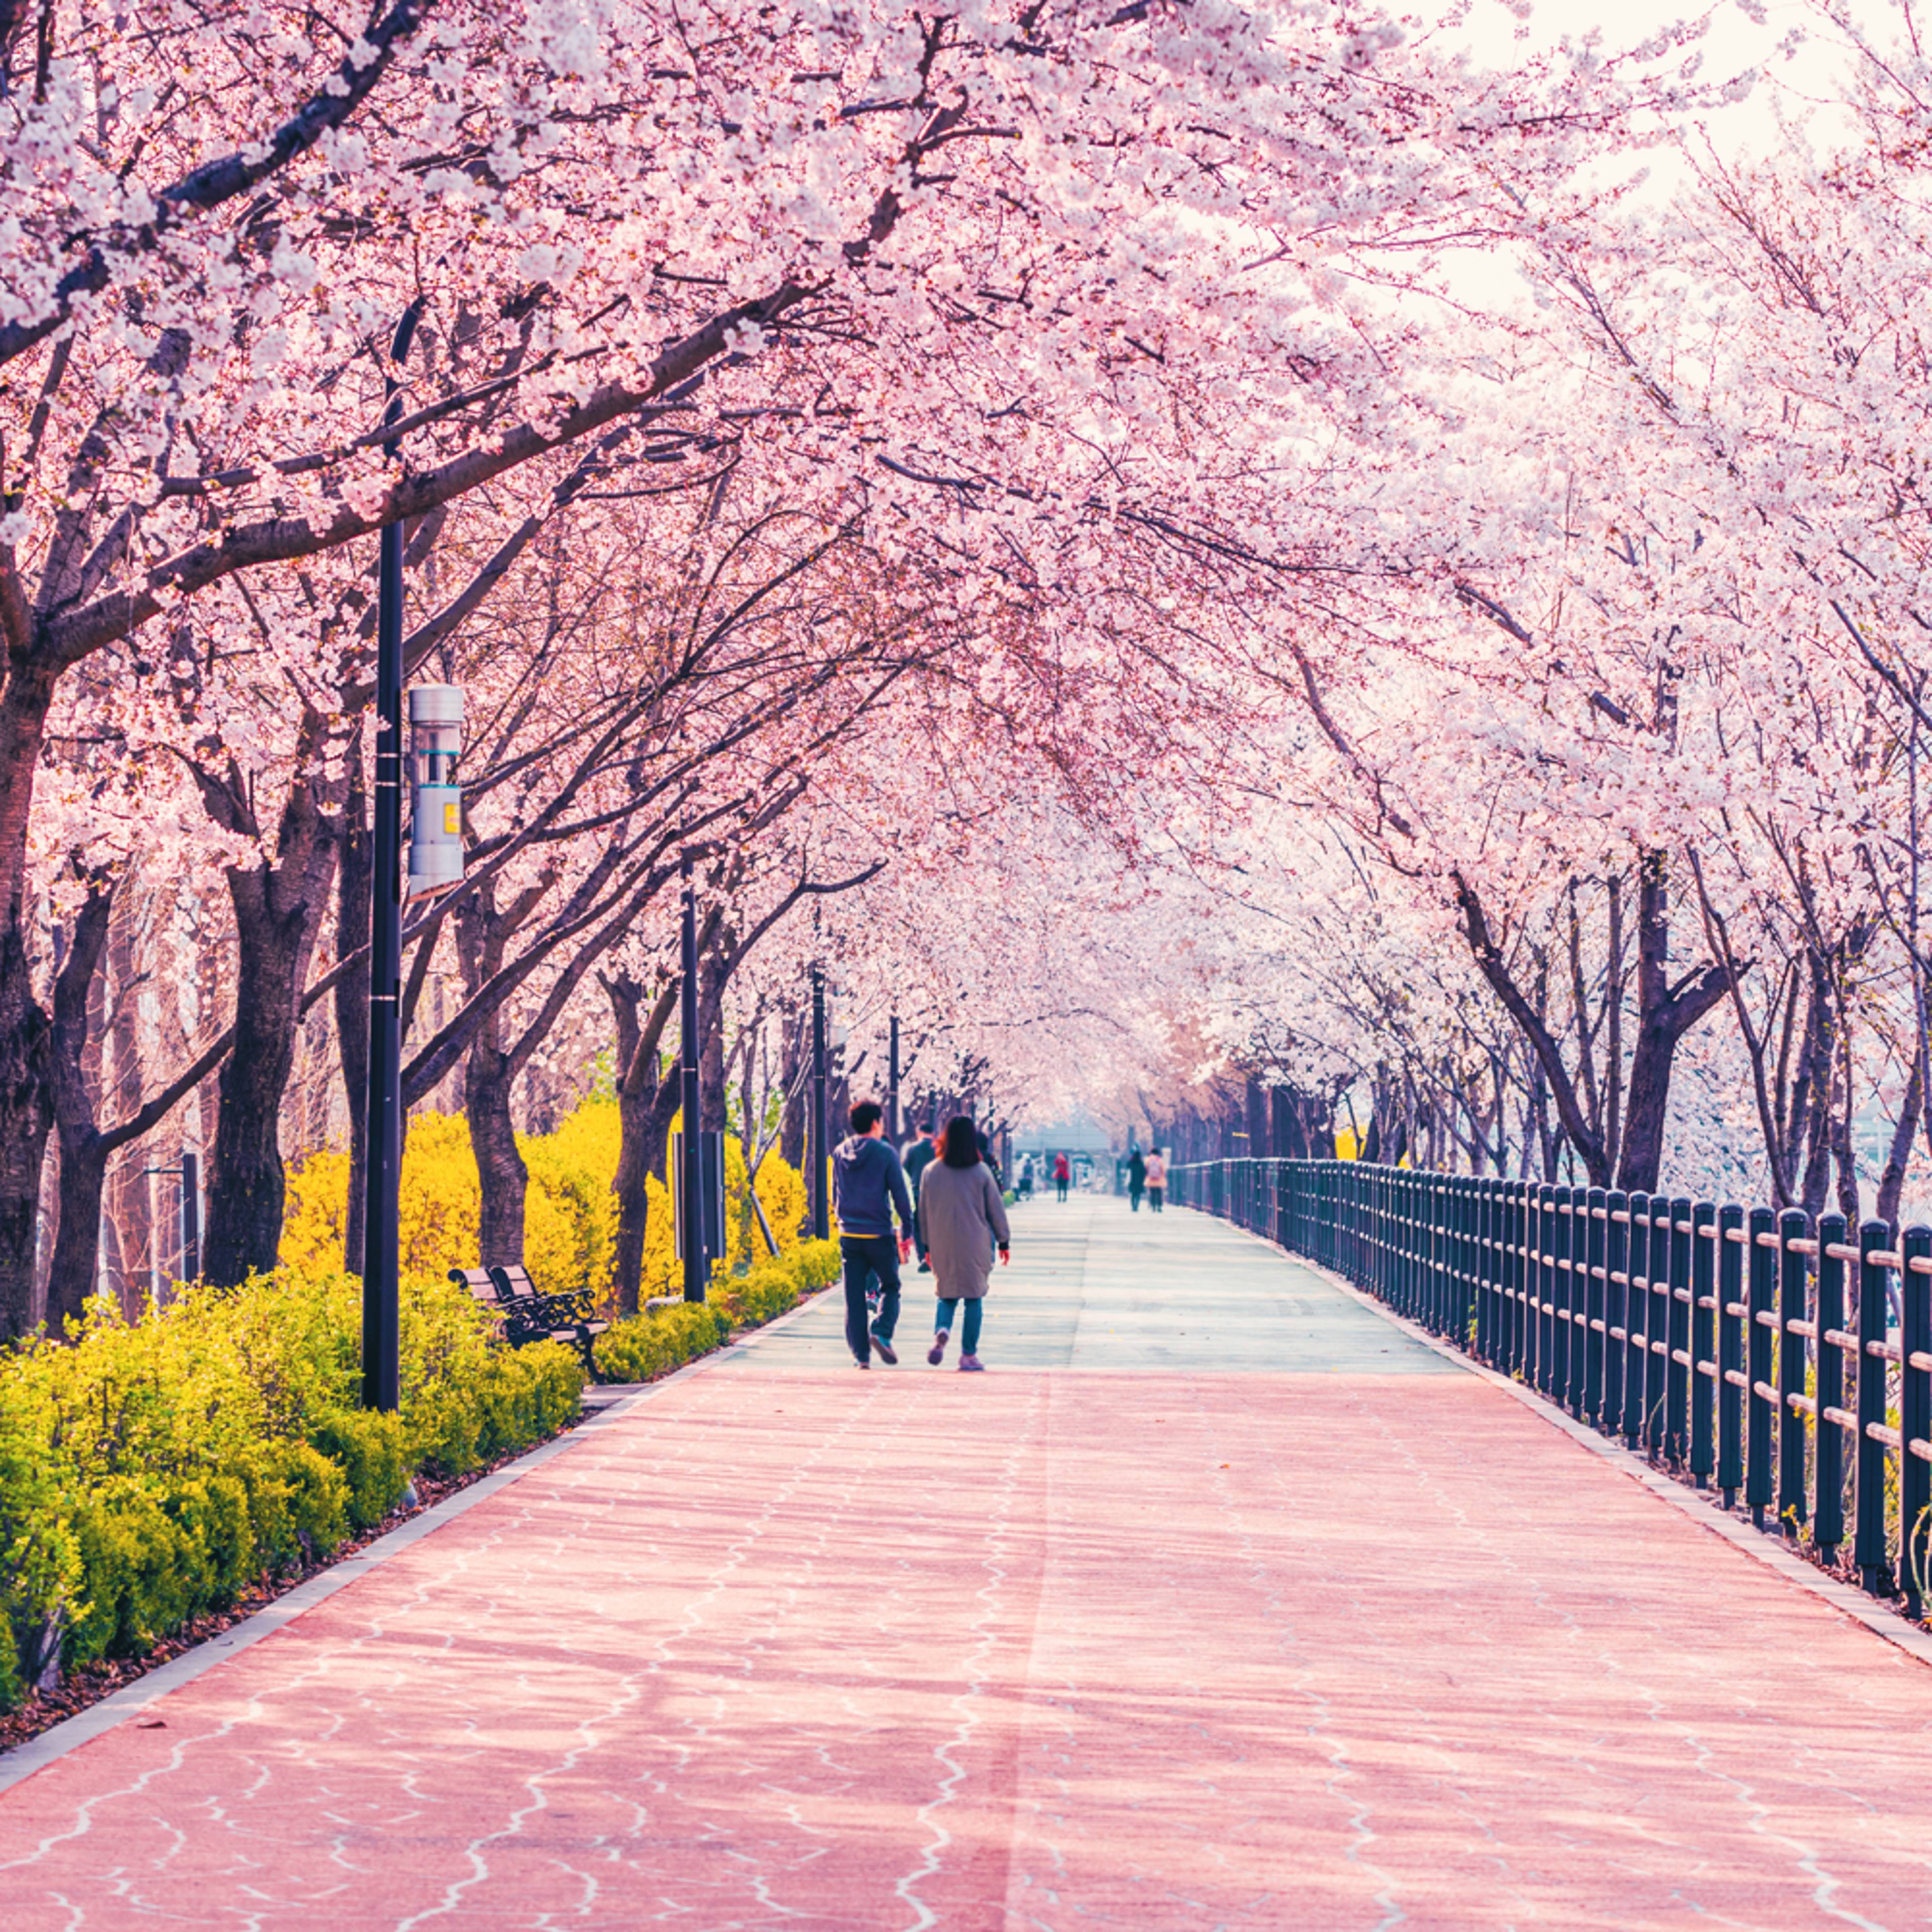 Design your perfect spring holiday in South Korea with a local expert